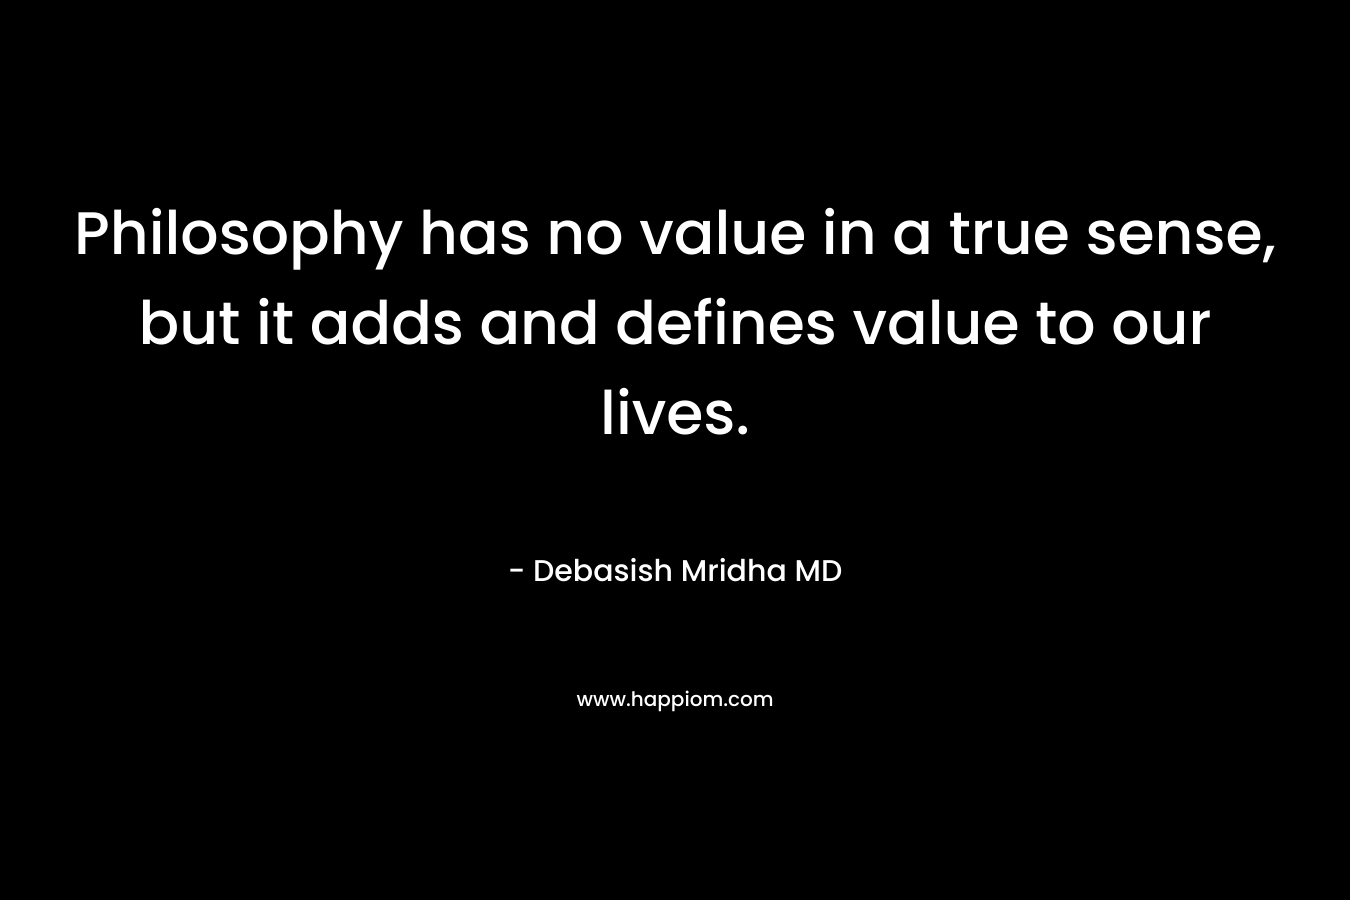 Philosophy has no value in a true sense, but it adds and defines value to our lives. – Debasish Mridha MD